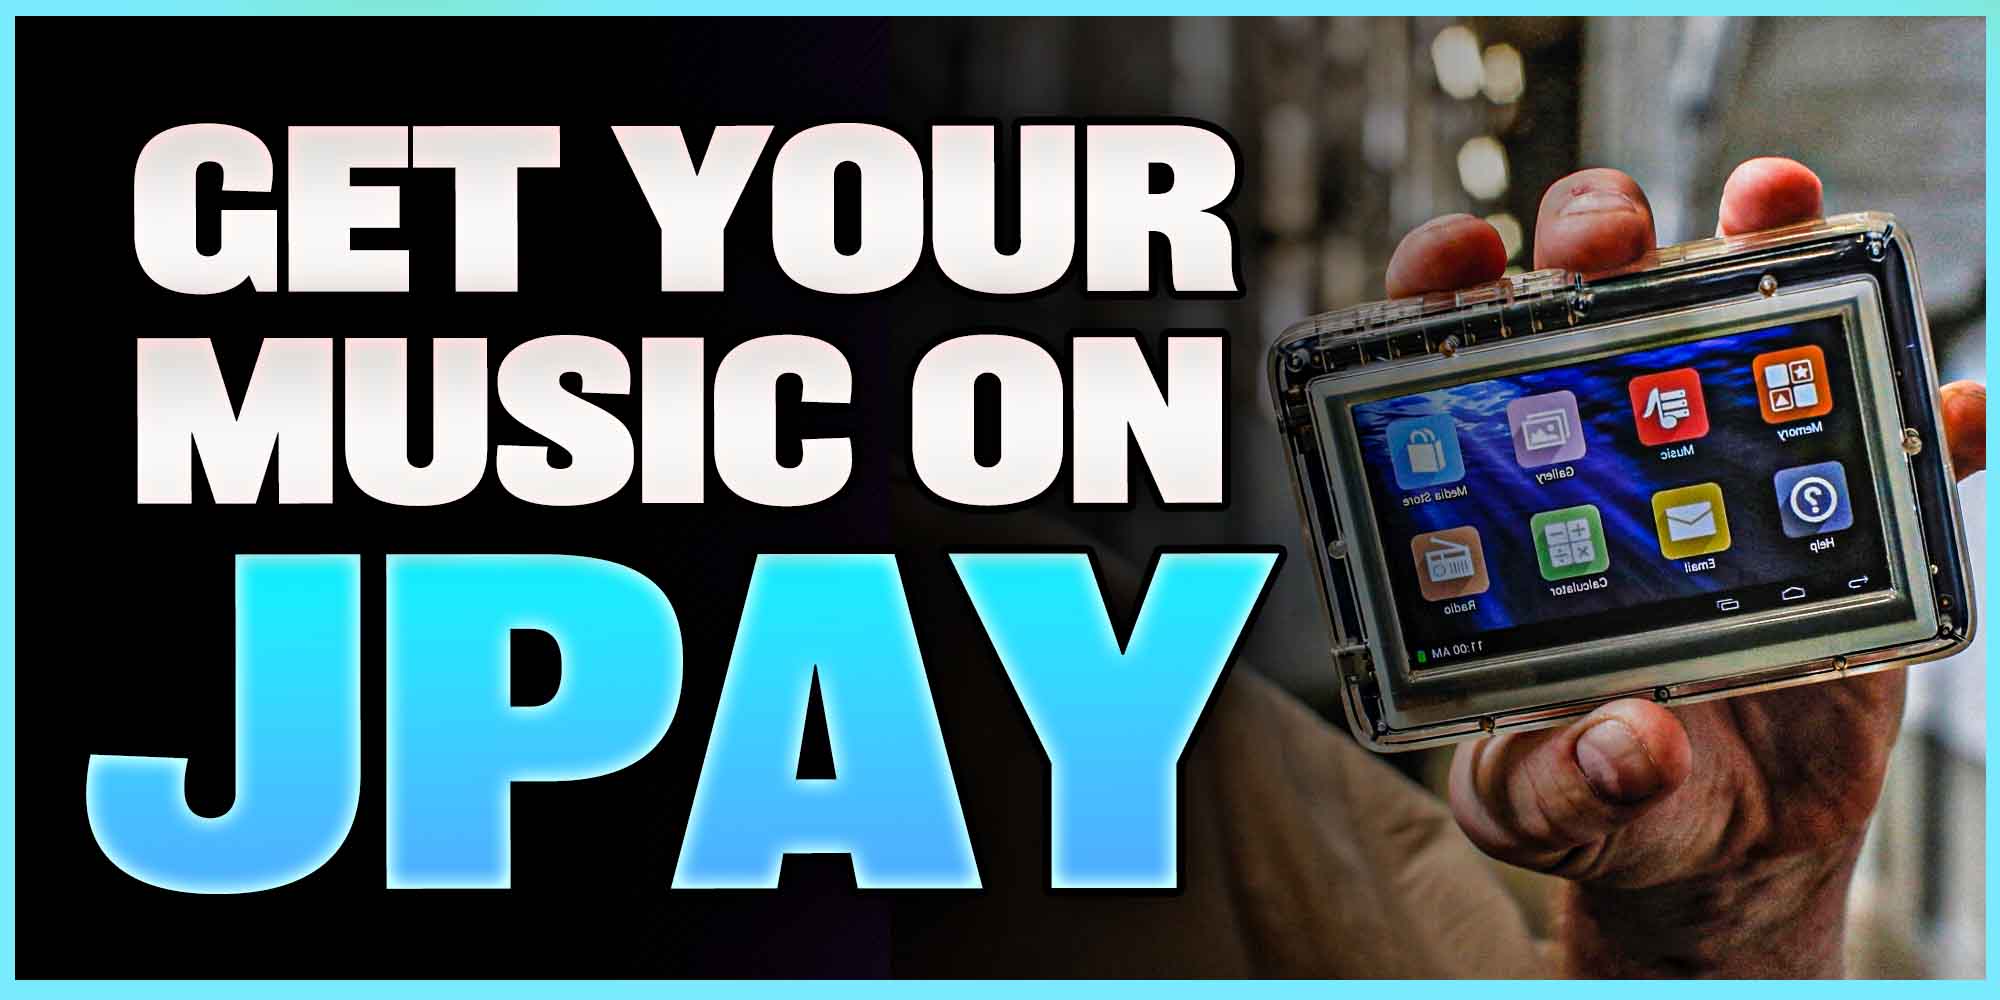 Get Your Music on JPay